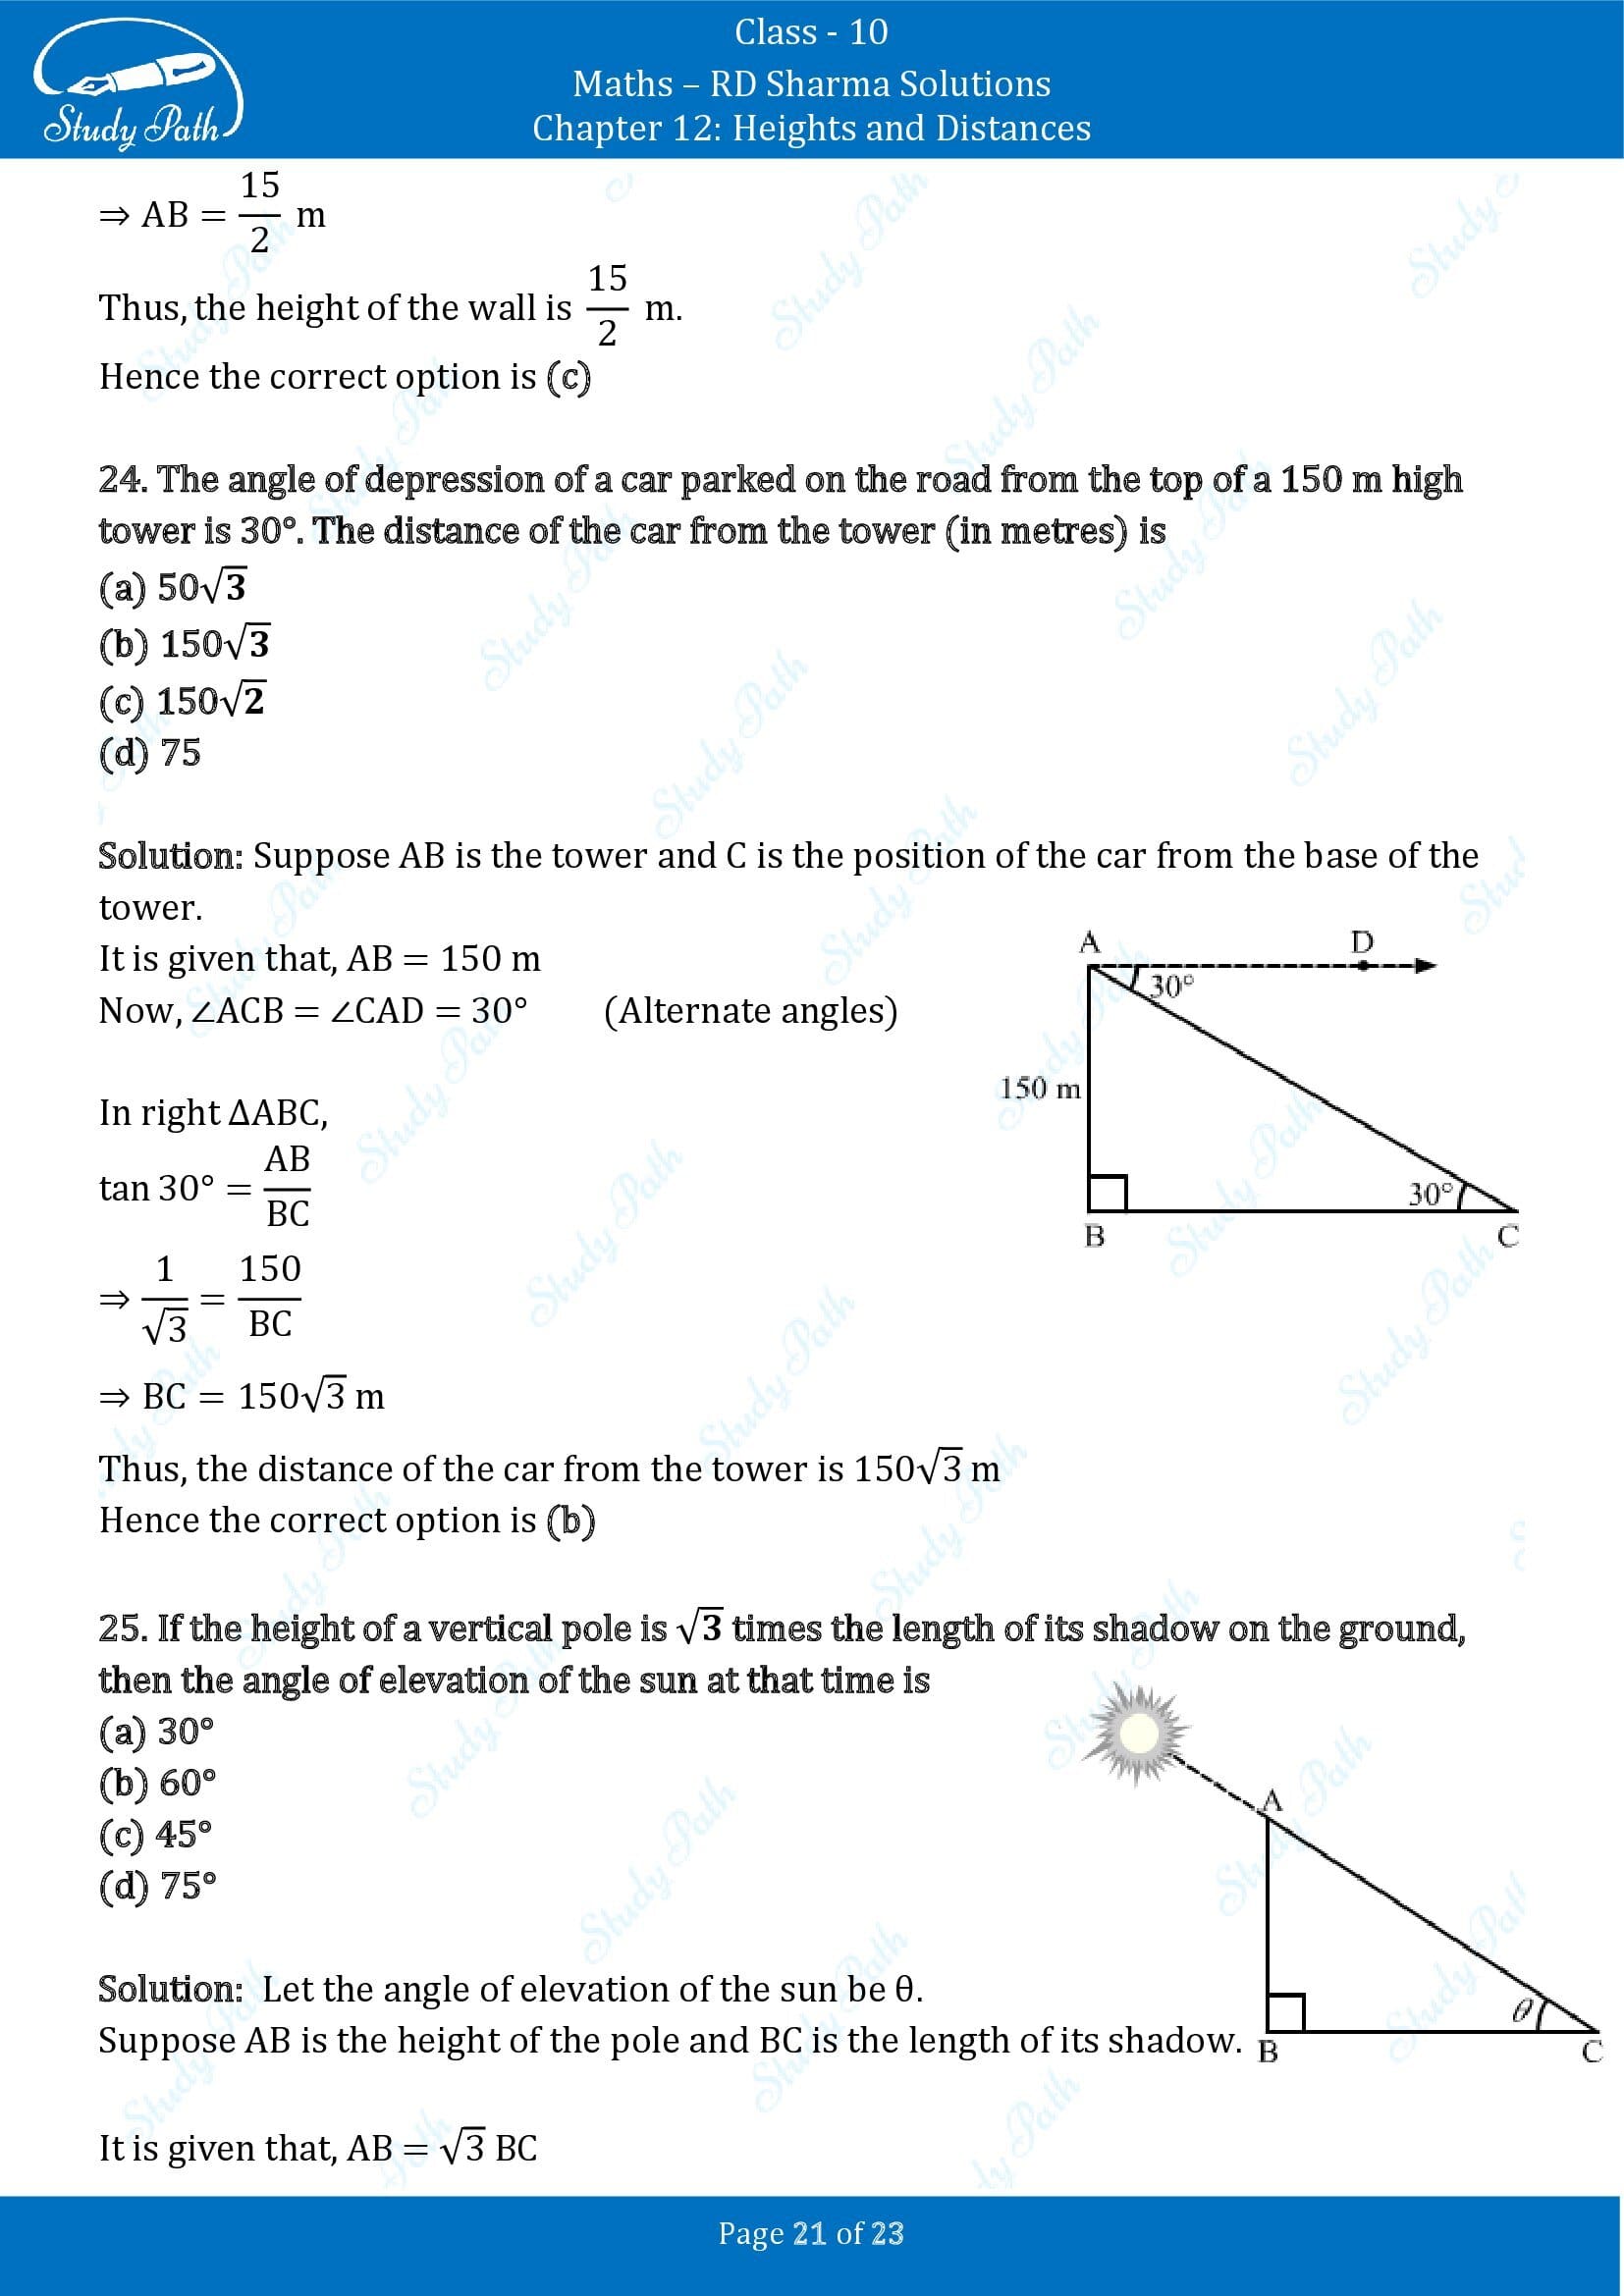 RD Sharma Solutions Class 10 Chapter 12 Heights and Distances Multiple Choice Question MCQs 00021